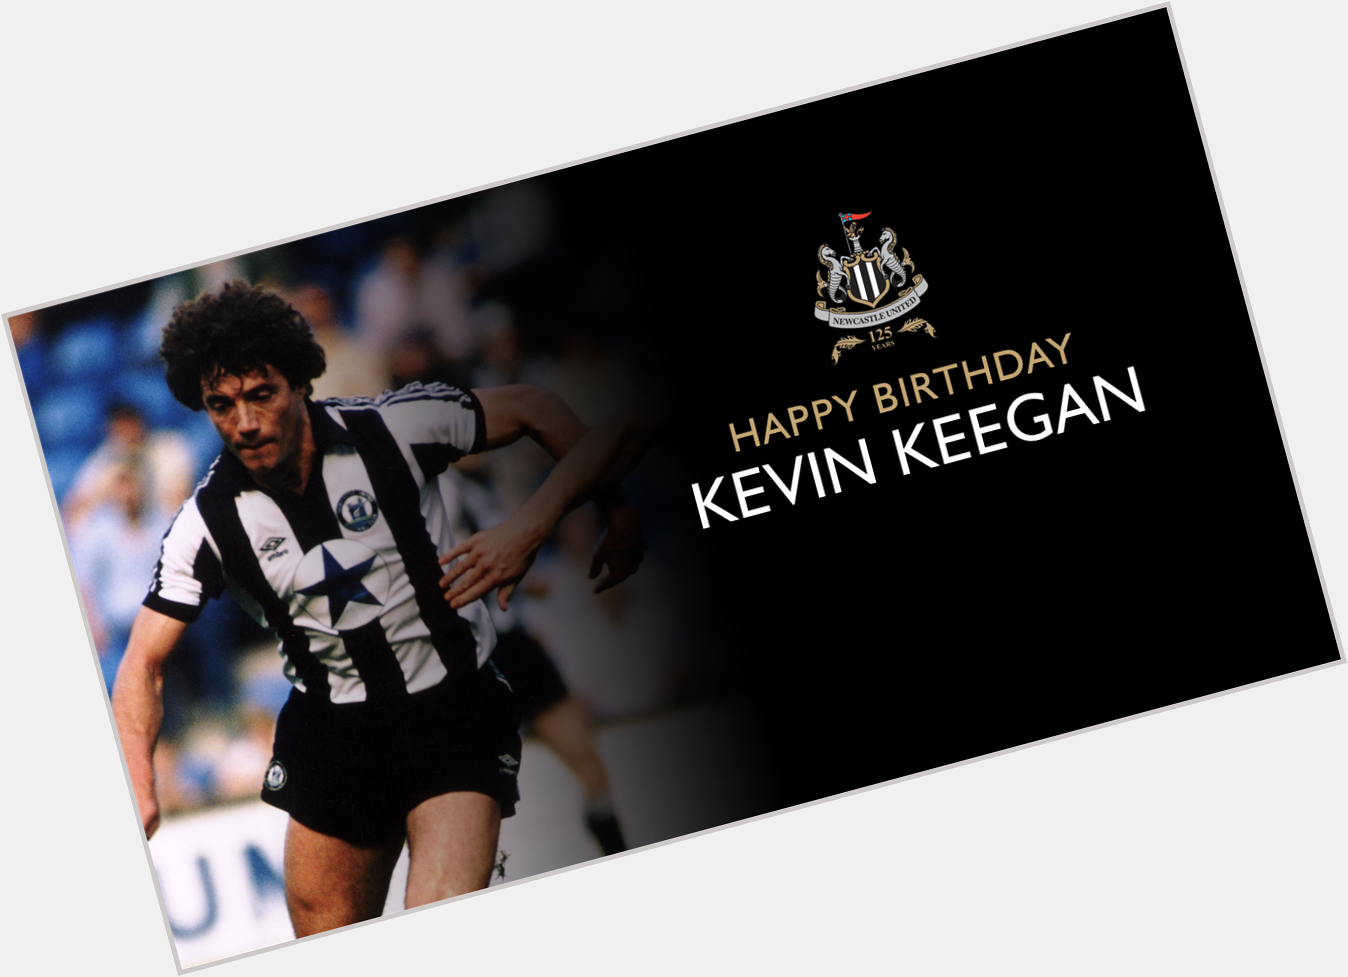 Happy birthday, Kevin Keegan! The Magpies\ former player and manager is 67 today. 